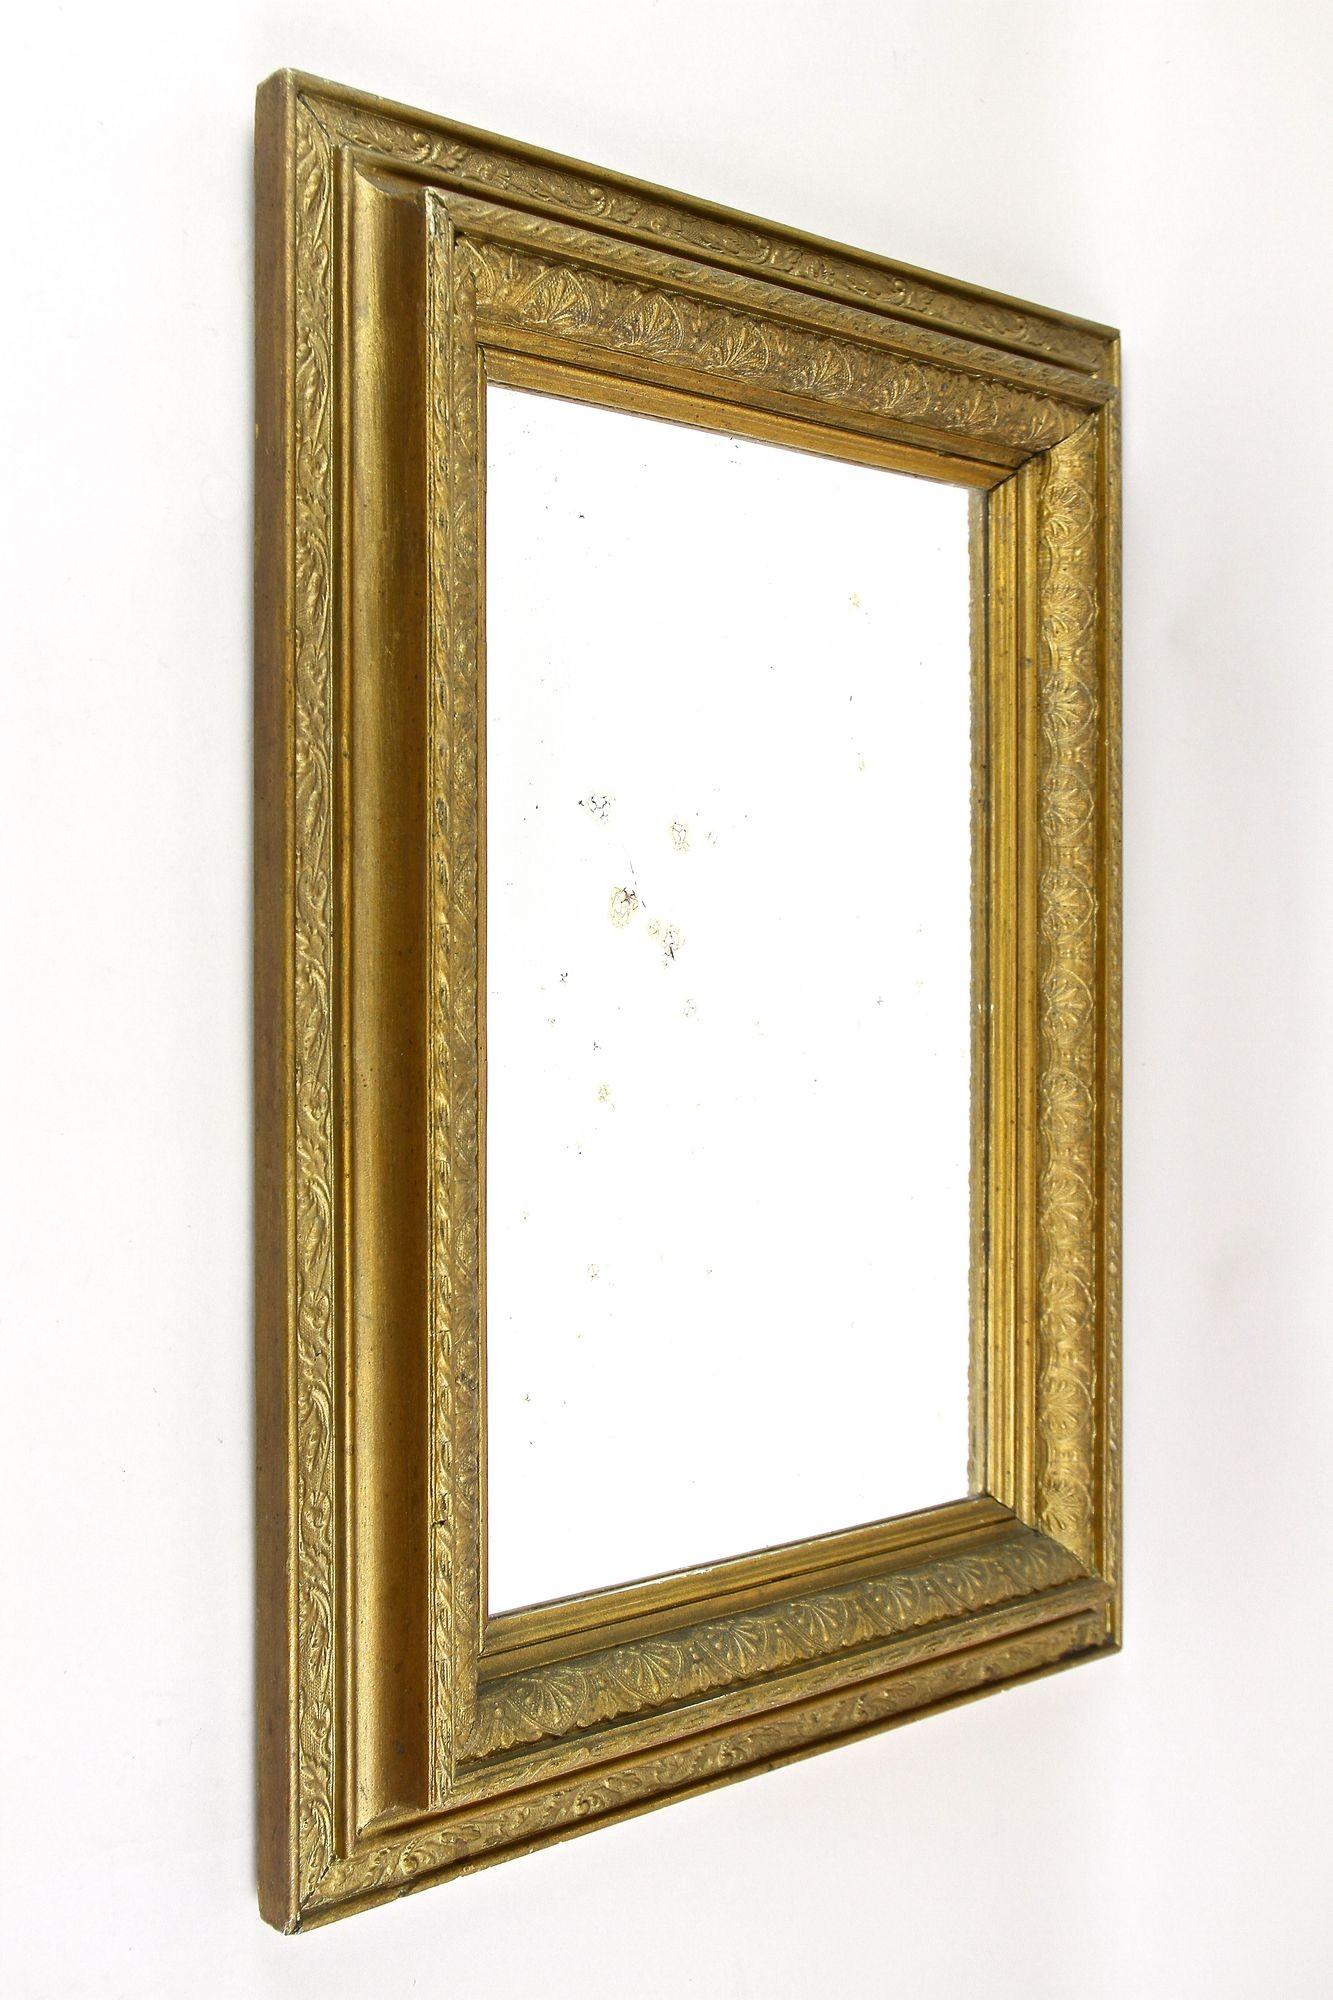 Charming bronzed/ gilt Art Nouveau wall mirror out of Austria from the period around 1900. This lovely early 20th century mirror impresses with an elaborately crafted broad gilt and bronzed frame work adorned by artfully floral design elements -